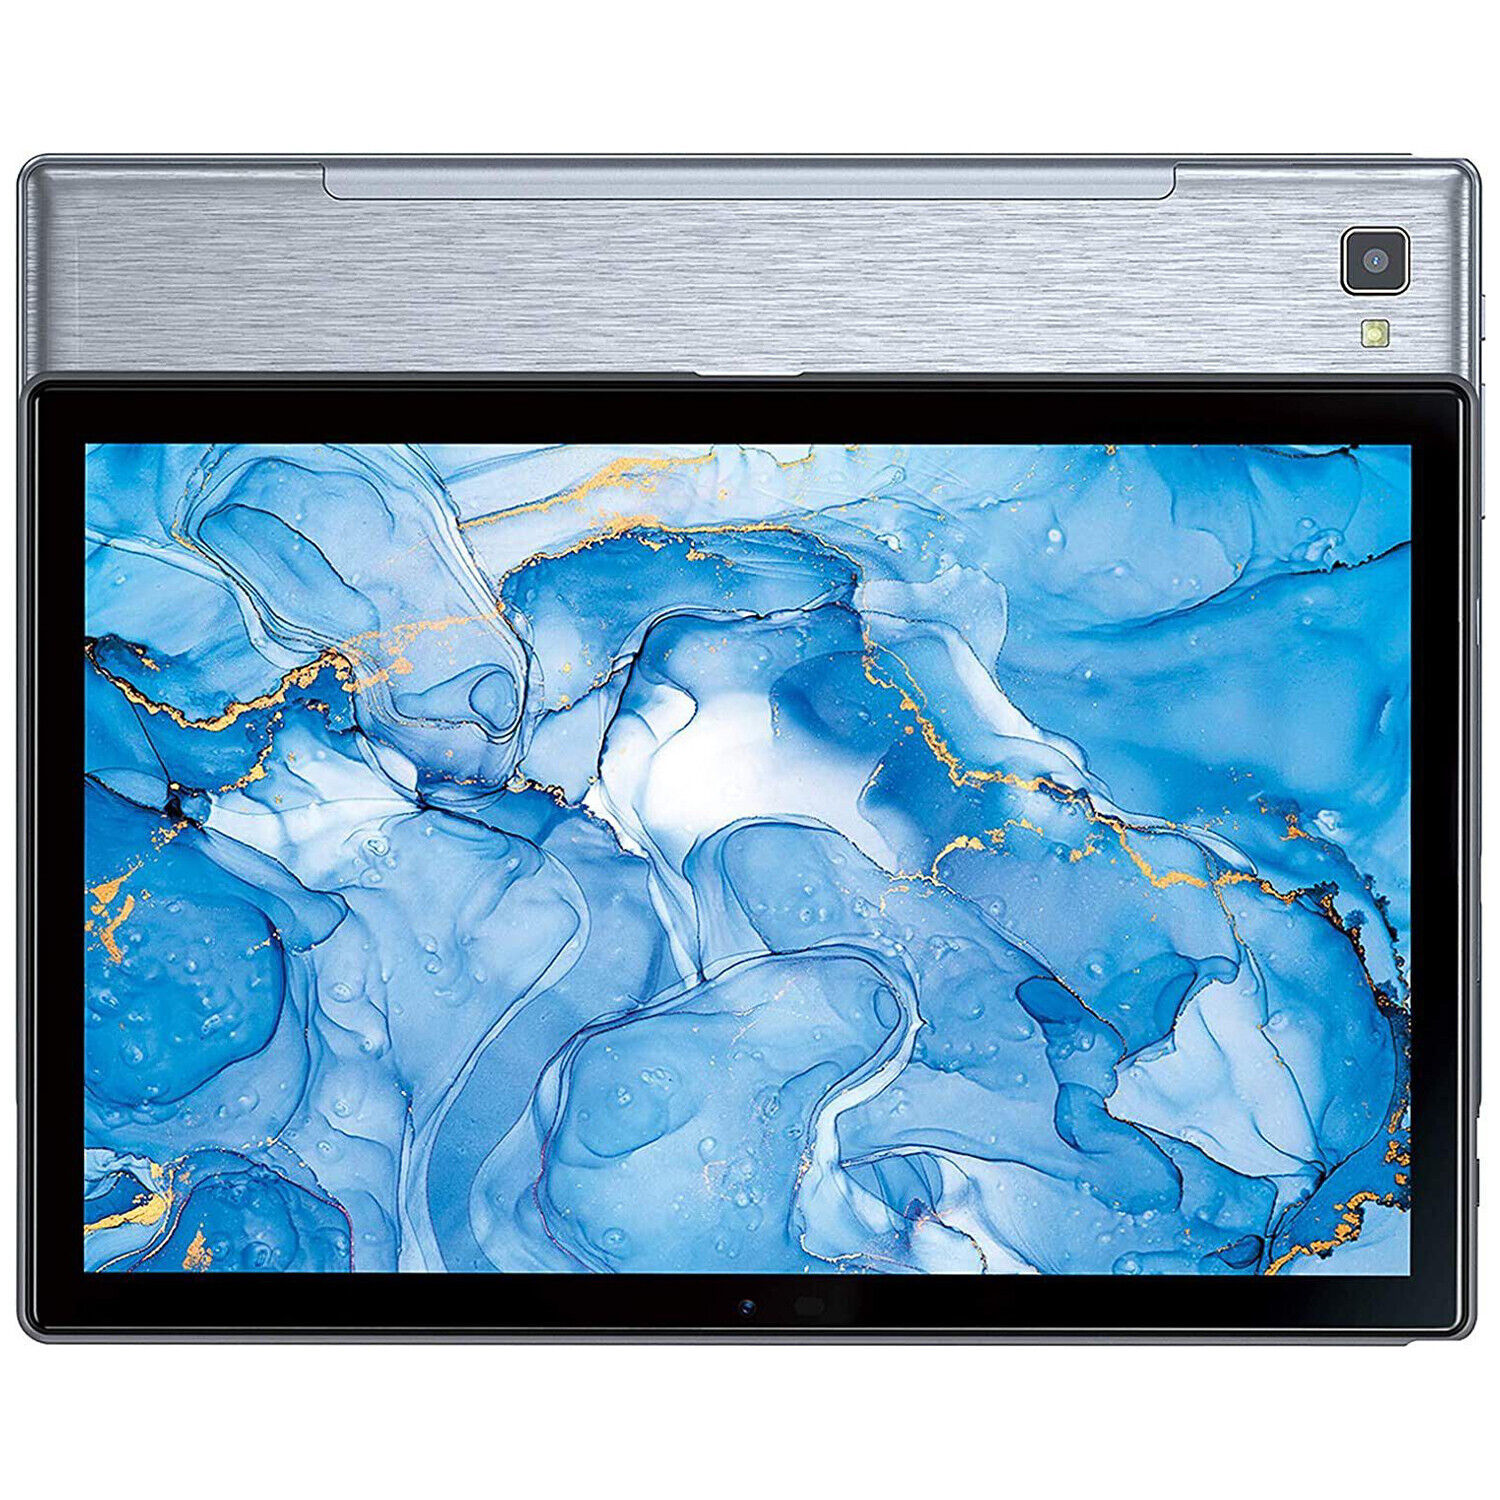 11inch 4G LTE Android Tablets Deca Core 1920*1200 IPS 8GB RAM 256GB ROM GPS